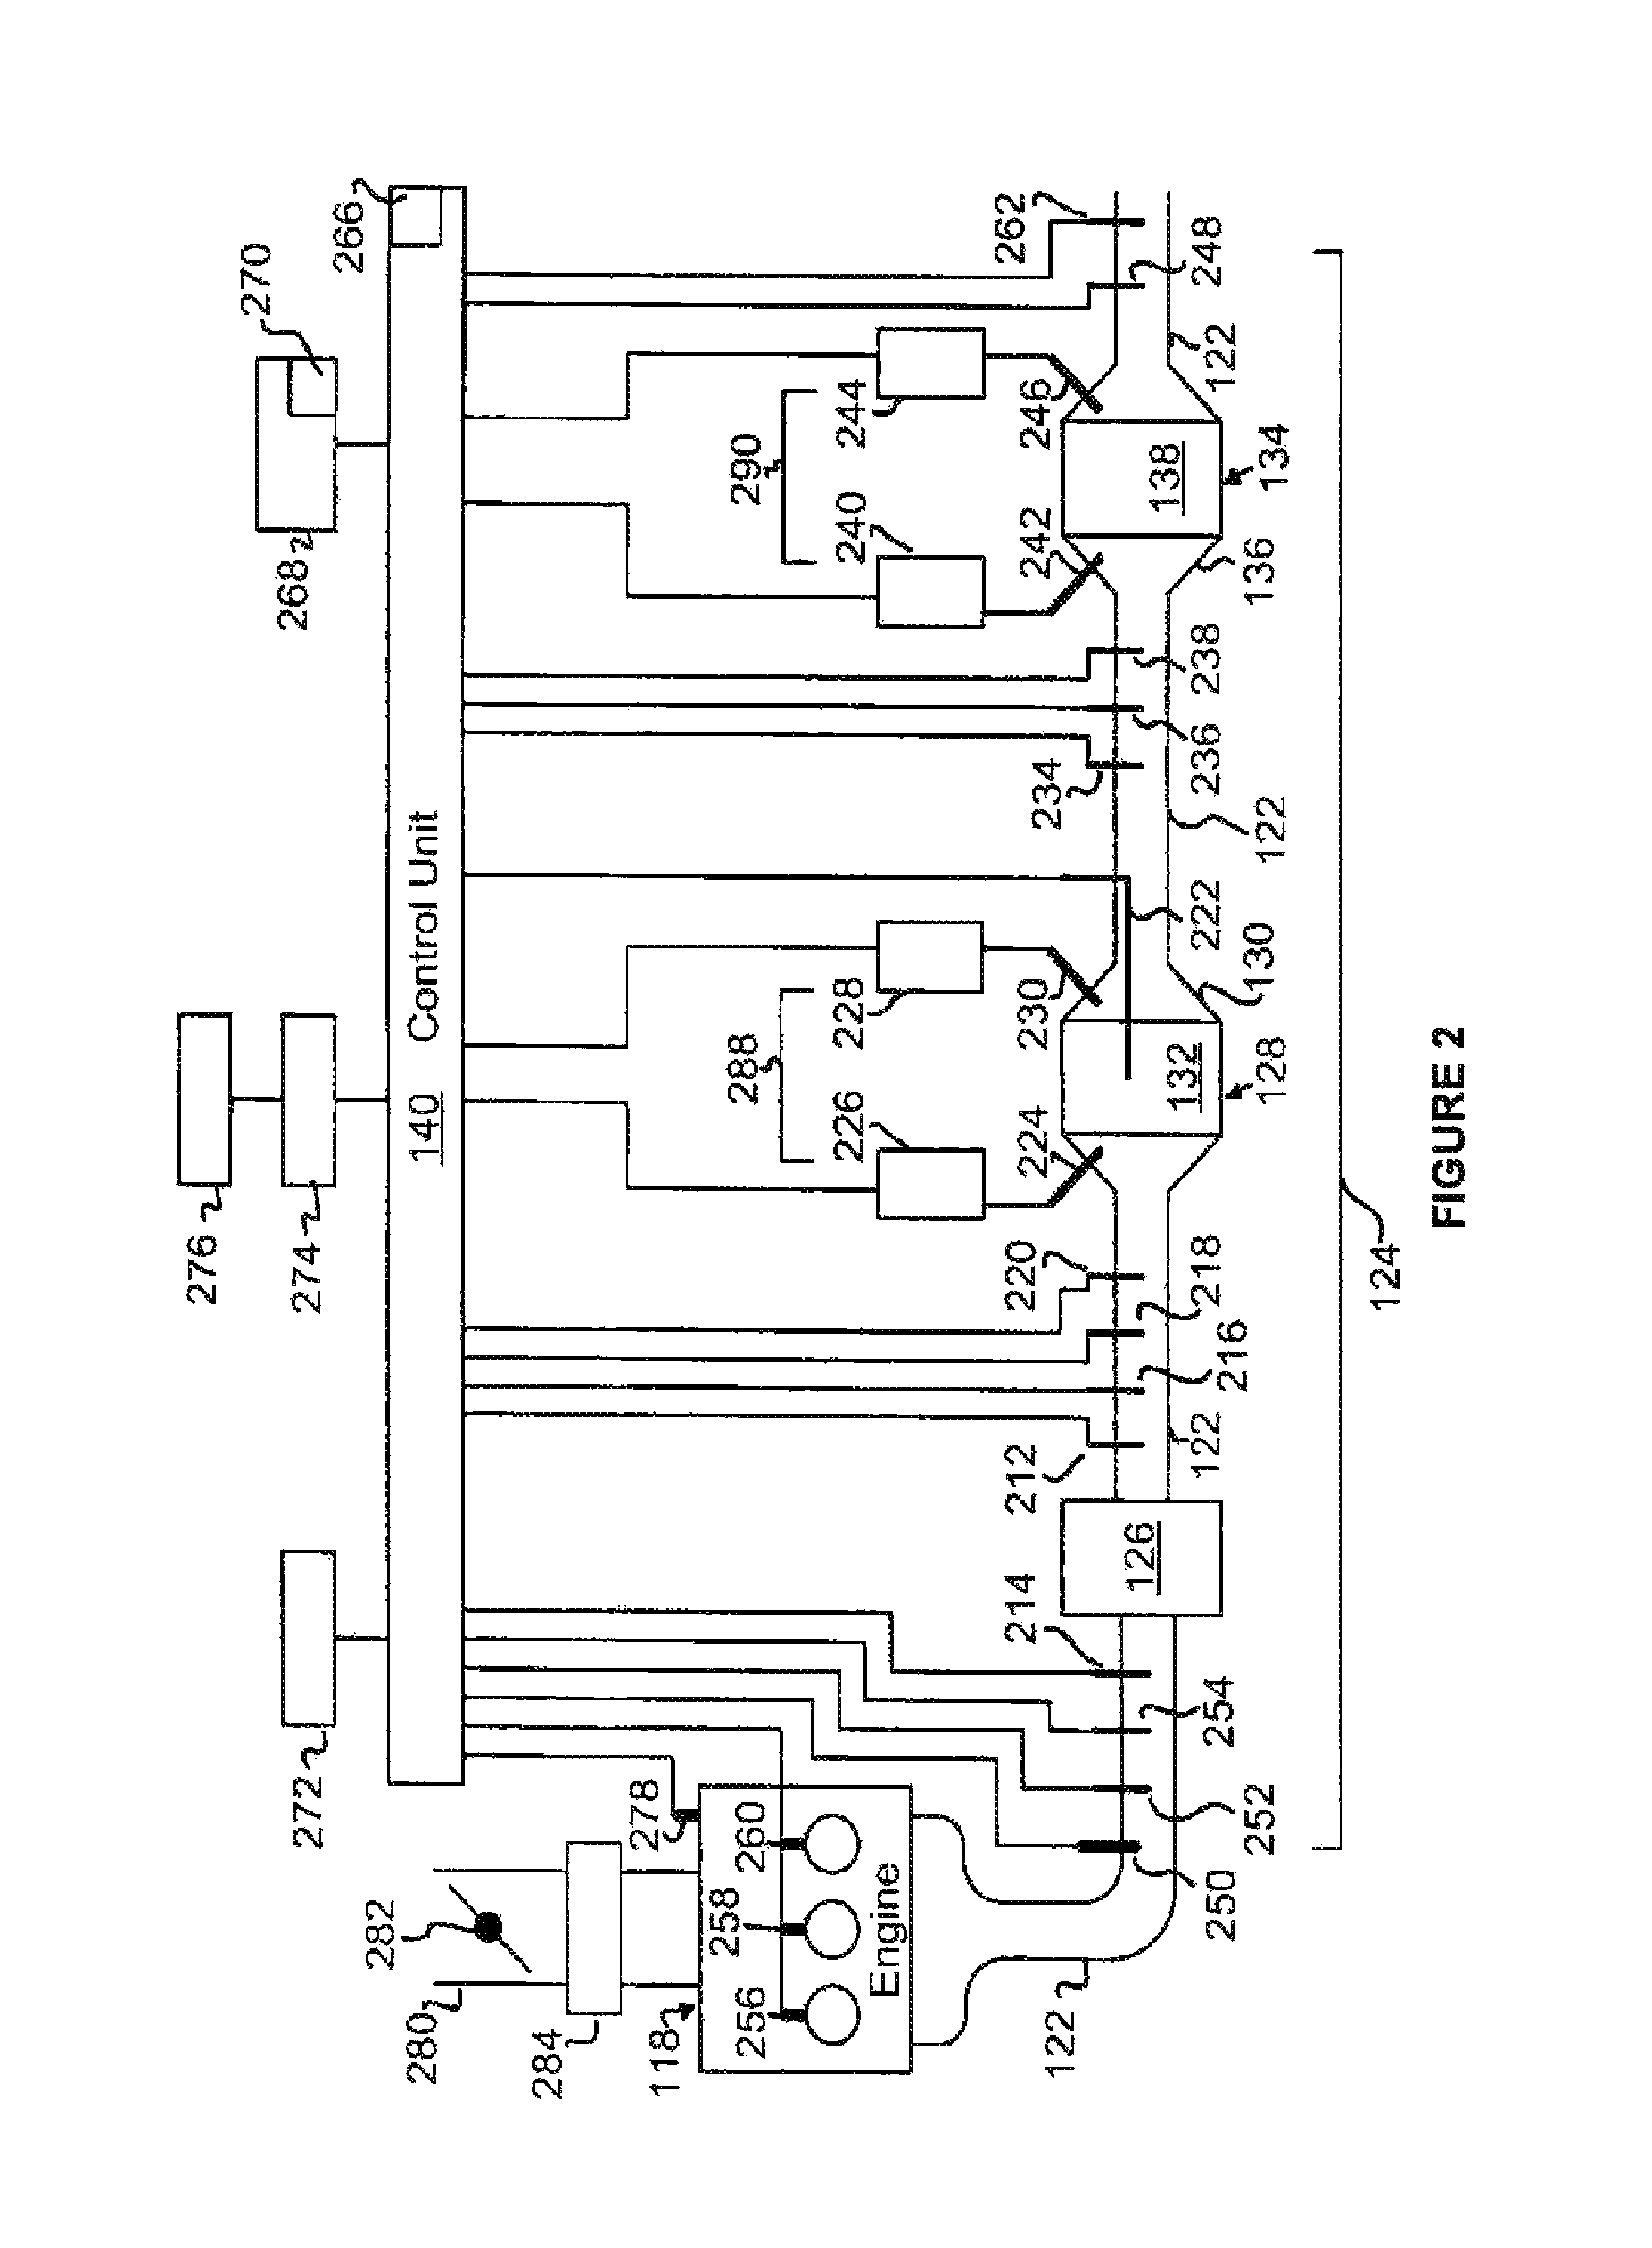 Method and system for controlling filter operation